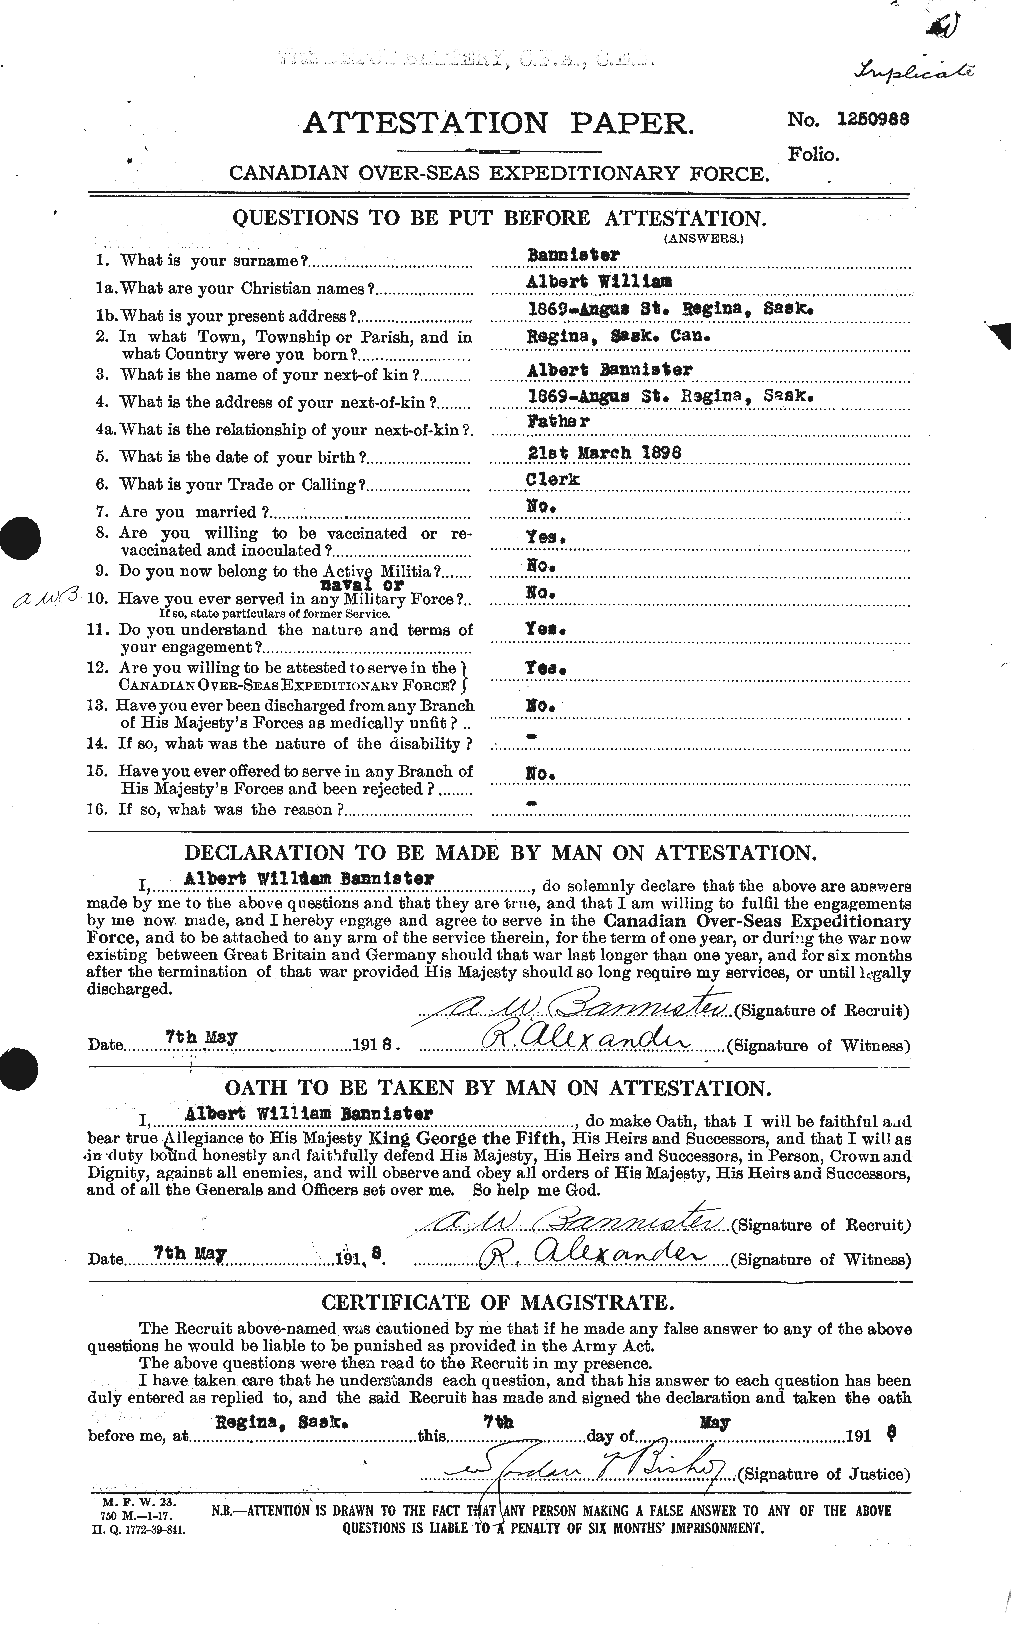 Personnel Records of the First World War - CEF 224814a